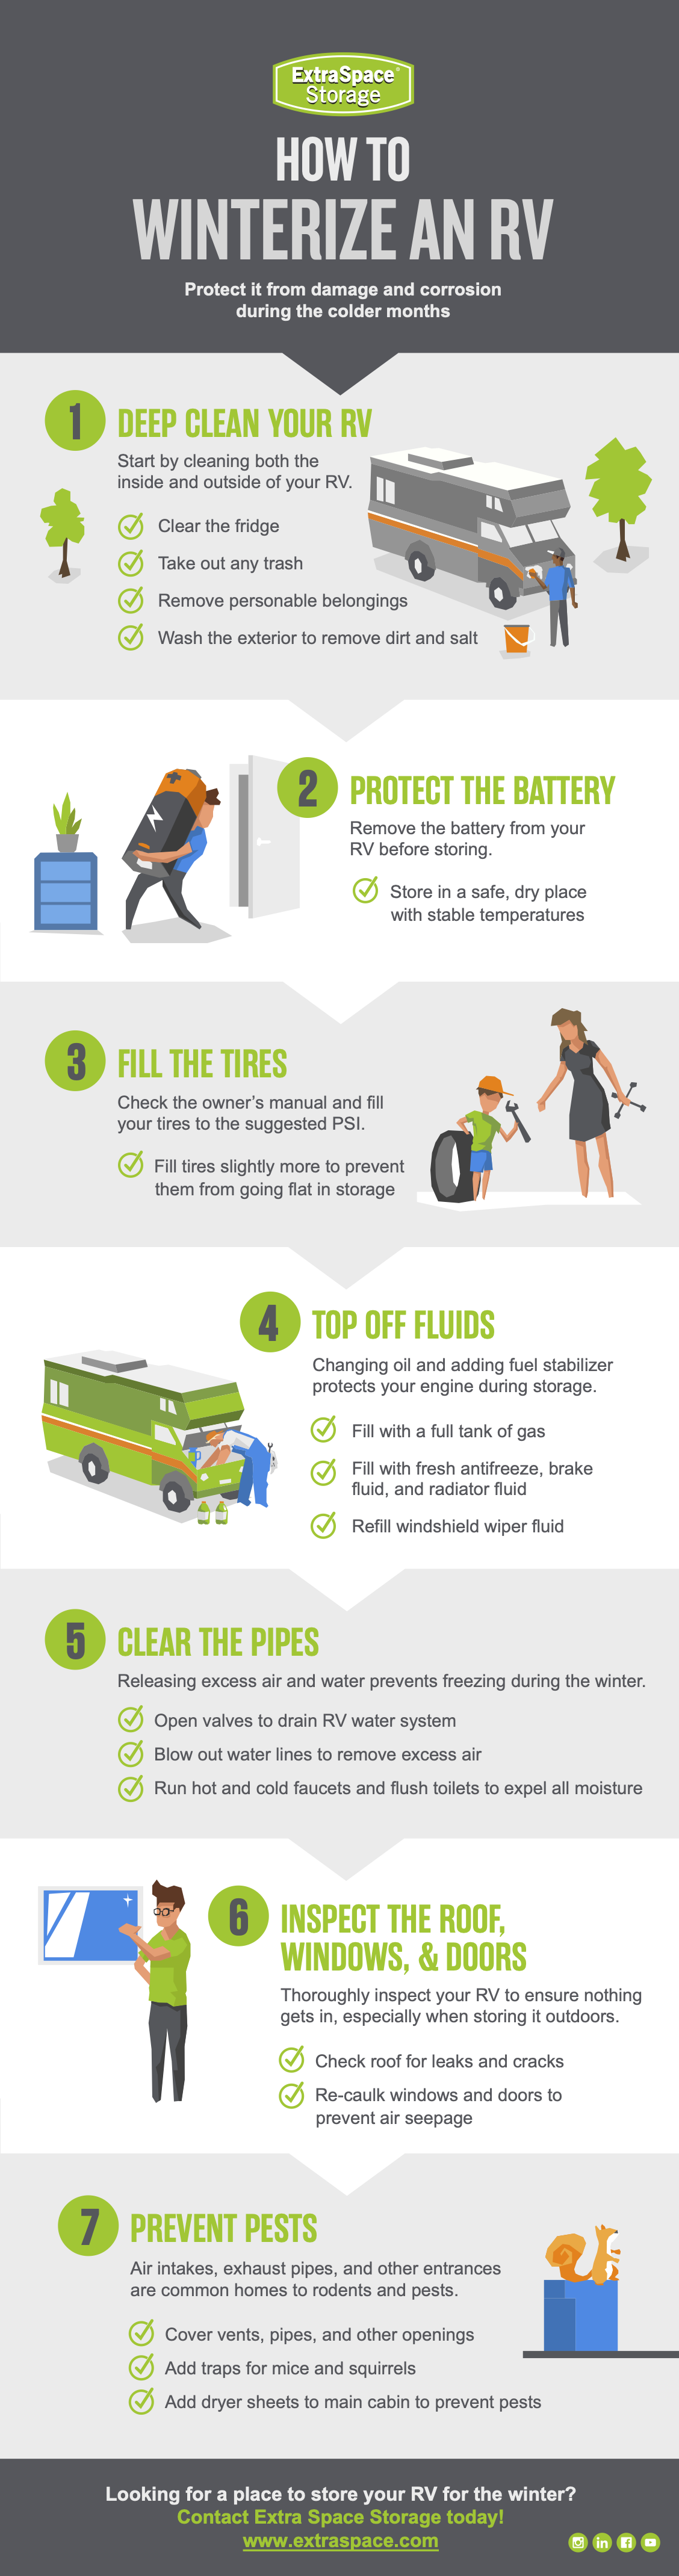 Infographic Describing the Ways to Winterize Your RV Before Putting it in Storage